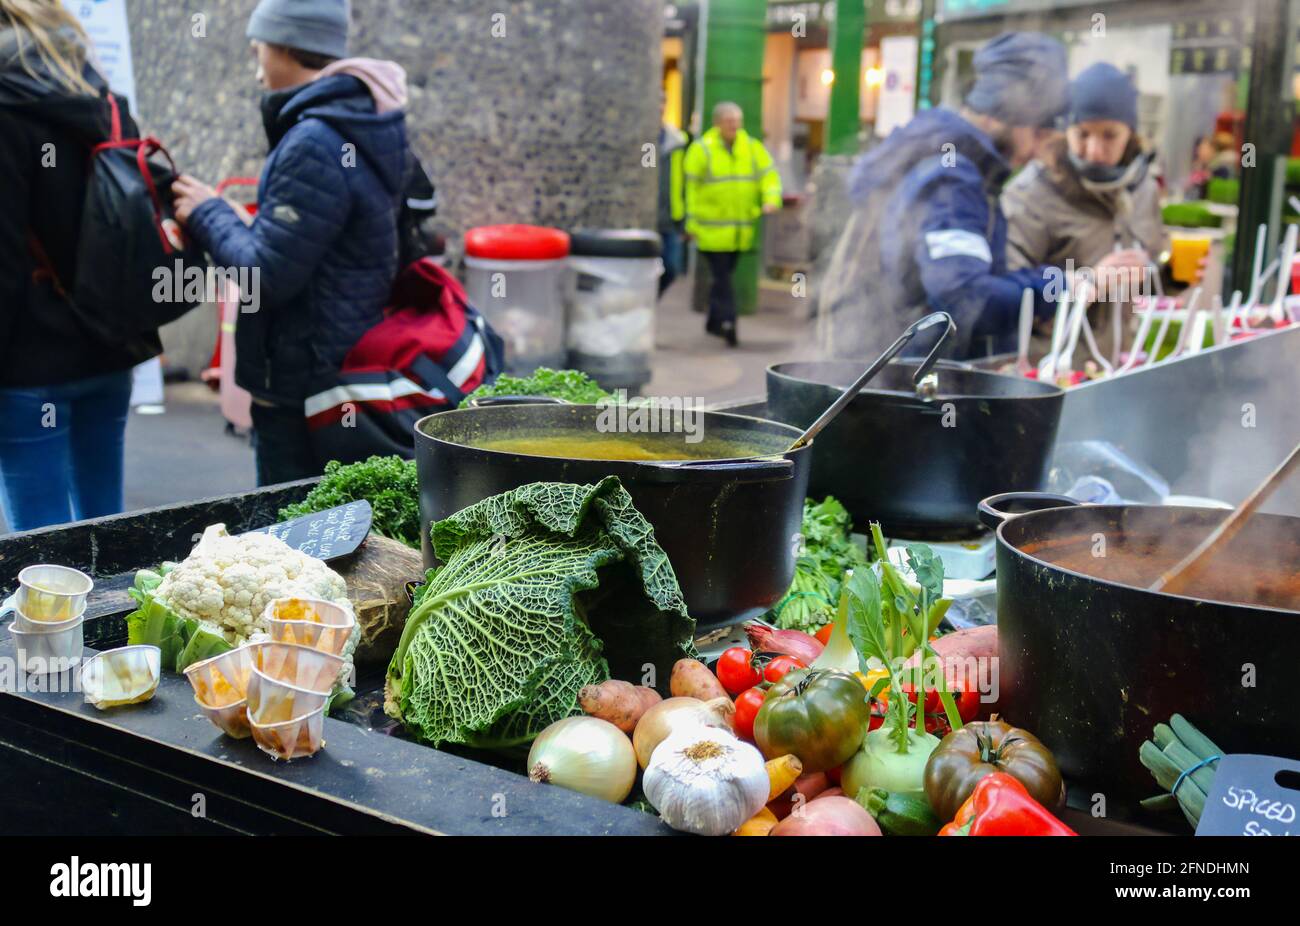 London UK 1 10 2018 Vegetables piled up around cast iron cooking pots full of steaming soup as customers stand around at famous Boroughs Market Stock Photo